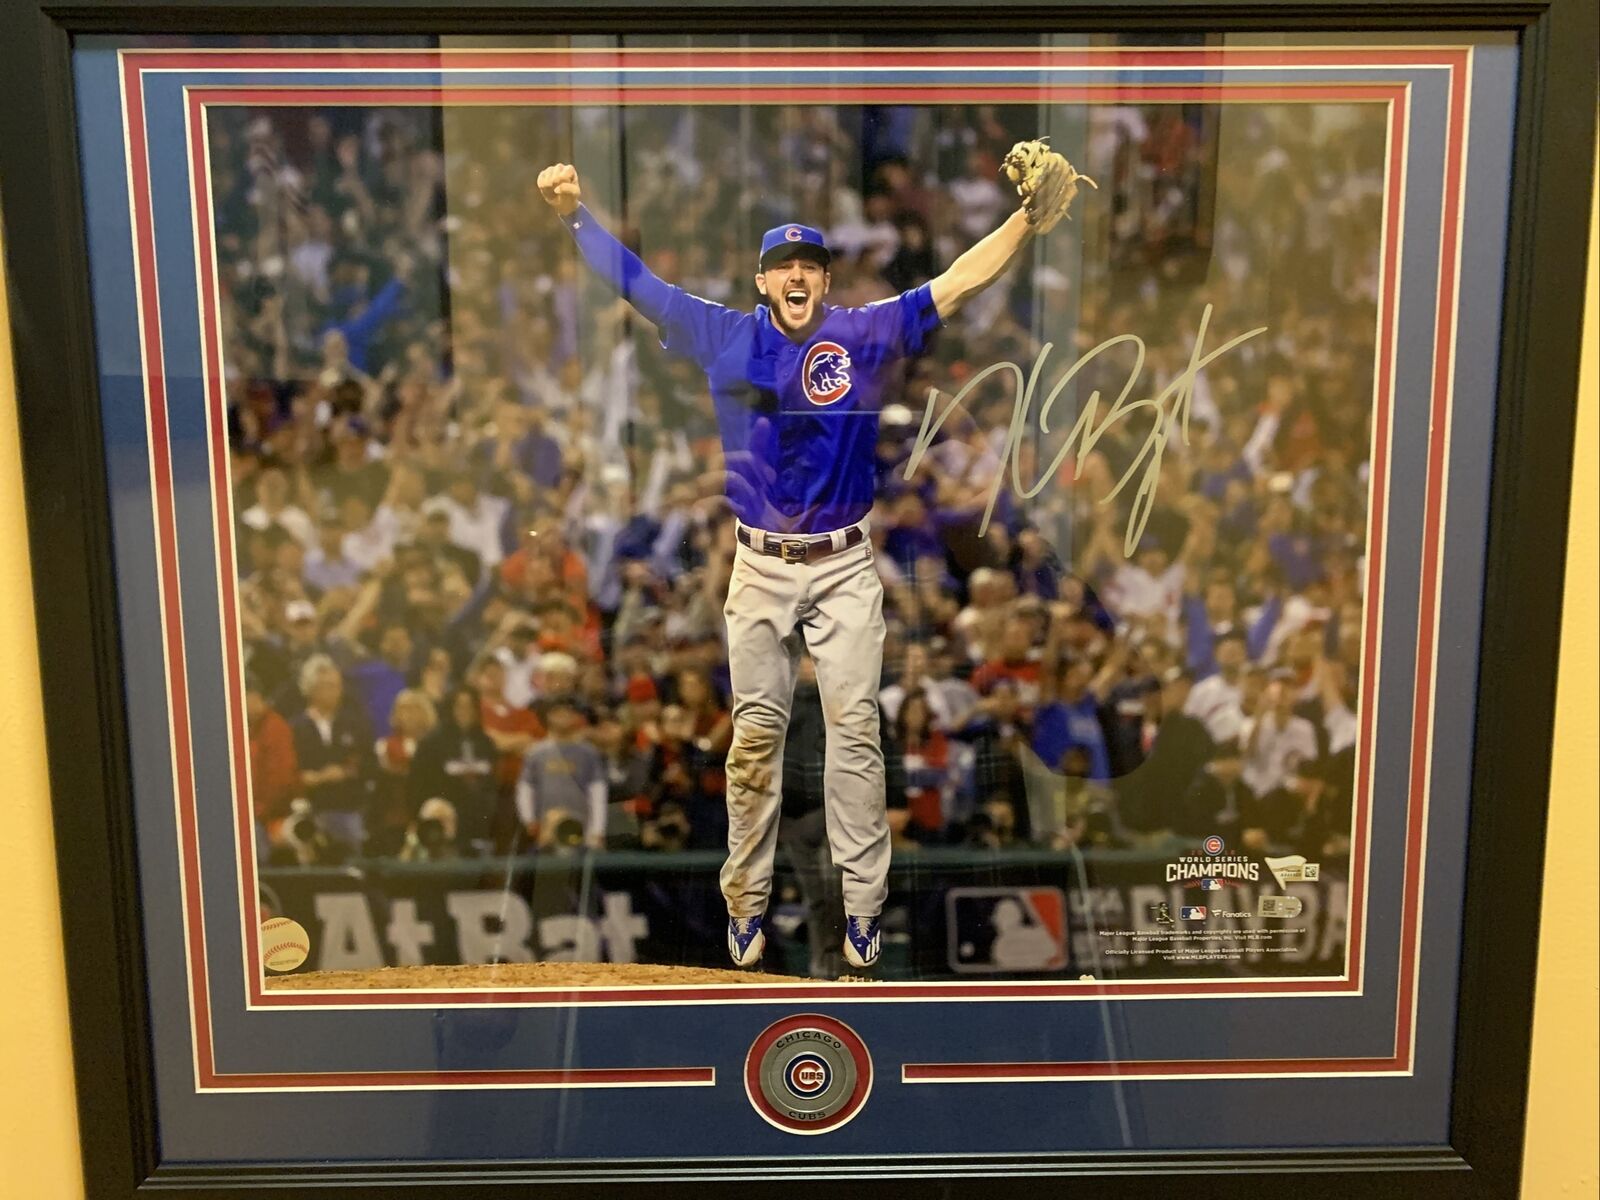 When it comes to Chicago Cubs World Series autographed memorabilia,  Fanatics has it covered